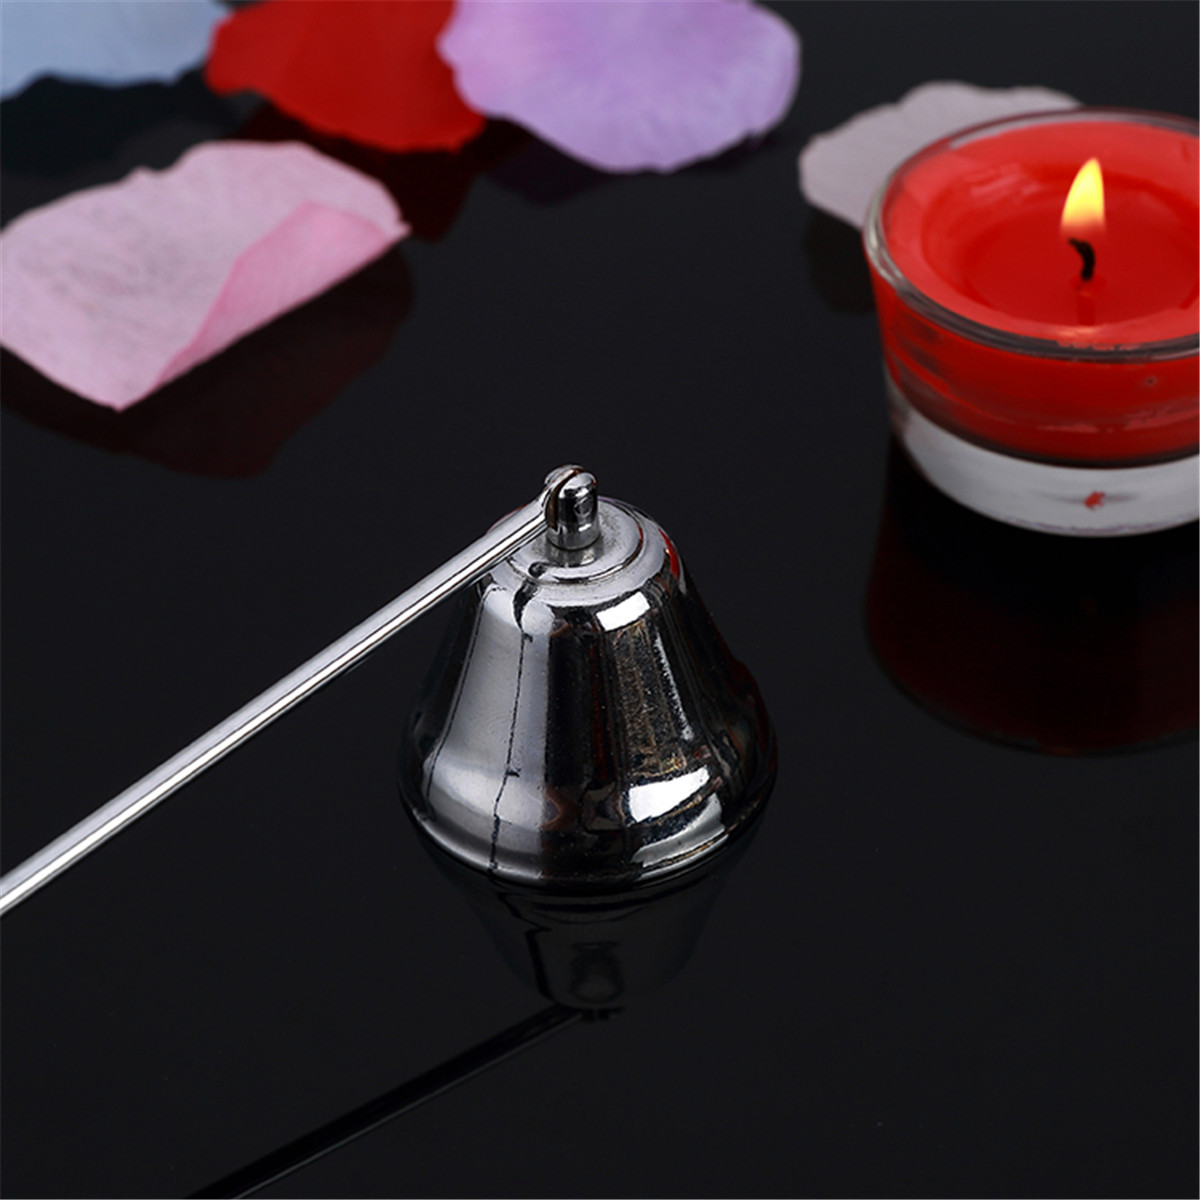 Stainless-Steel-Candle-Snuffer-Silver-Long-Extinguisher-for-Tea-Light-Candle-Tool-1252840-6